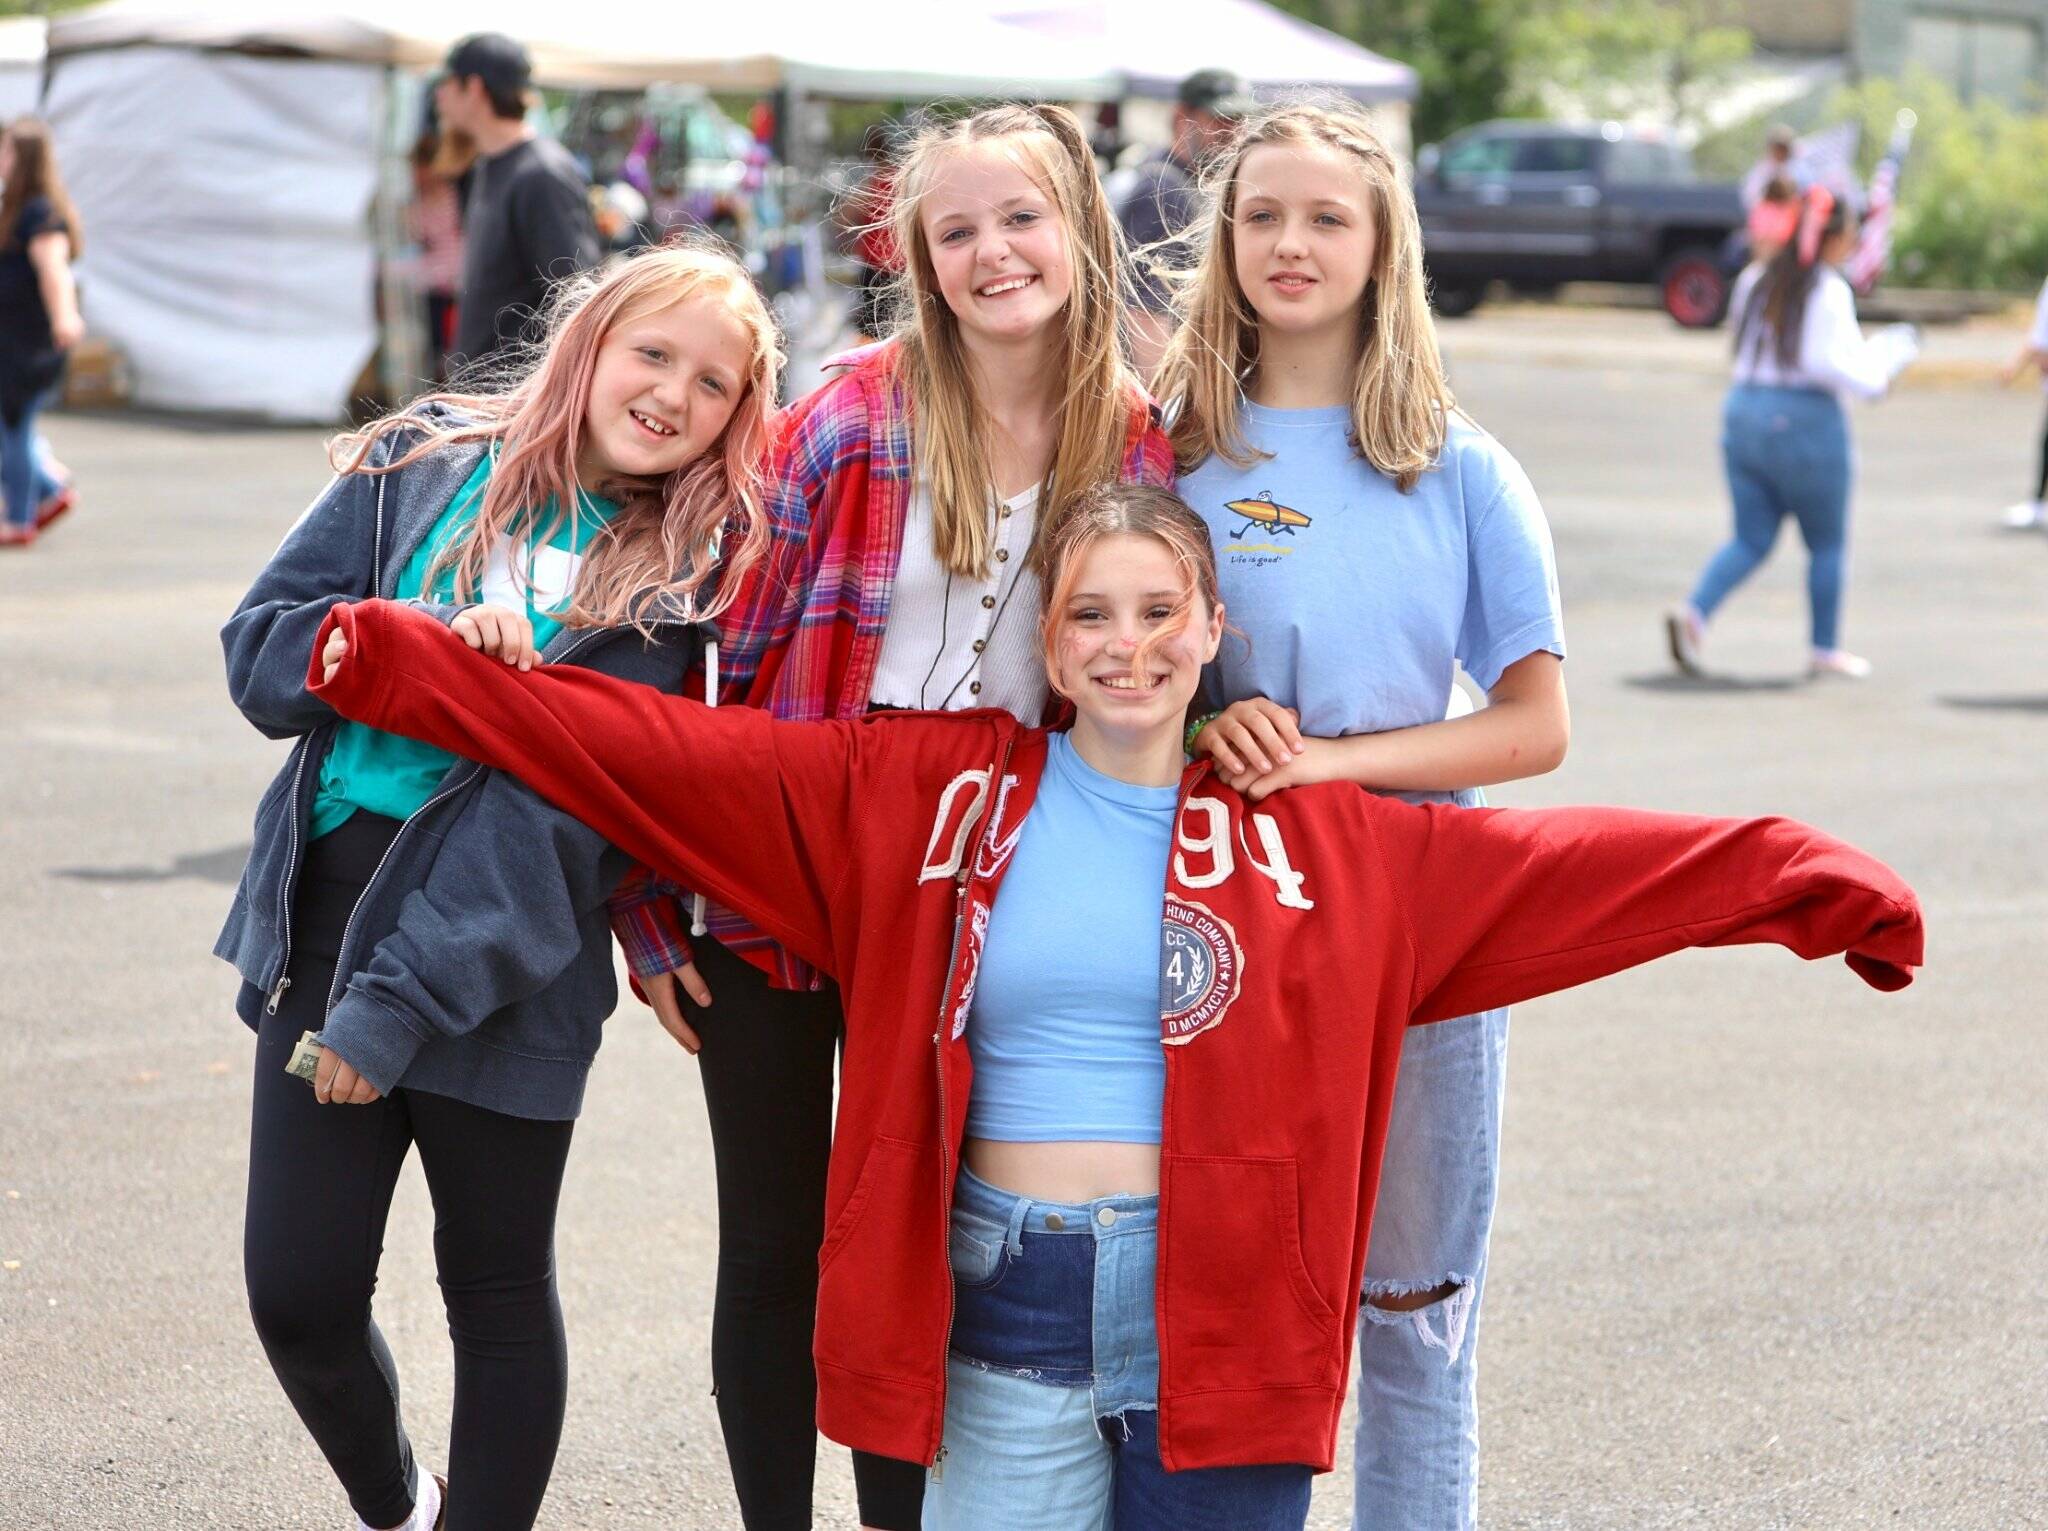 Rick Moyer of Moyer Multi Media LLC.
Four girls have a great time posing for a photo during a past Splash Festival event. The festival this year should have a better firework display than usual, which is saying a lot as the usual display — at 10 p.m. — is well-reviewed.